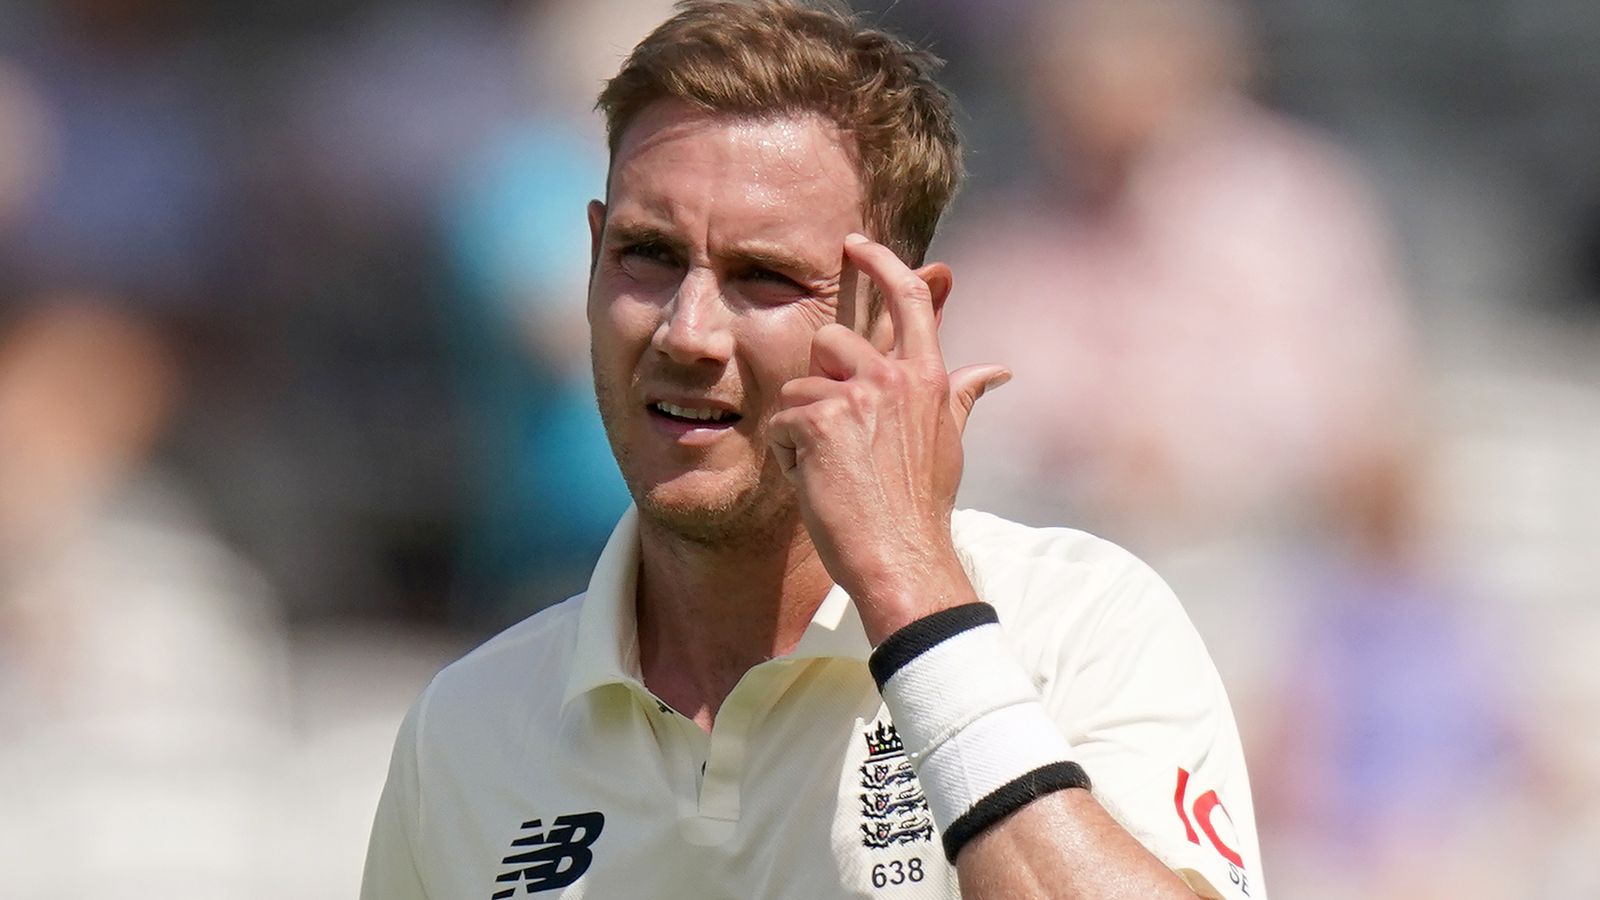 England bowler Stuart Broad will not rush decision on Test future after 'very disappointing' Ashes | Cricket News | Sky Sports